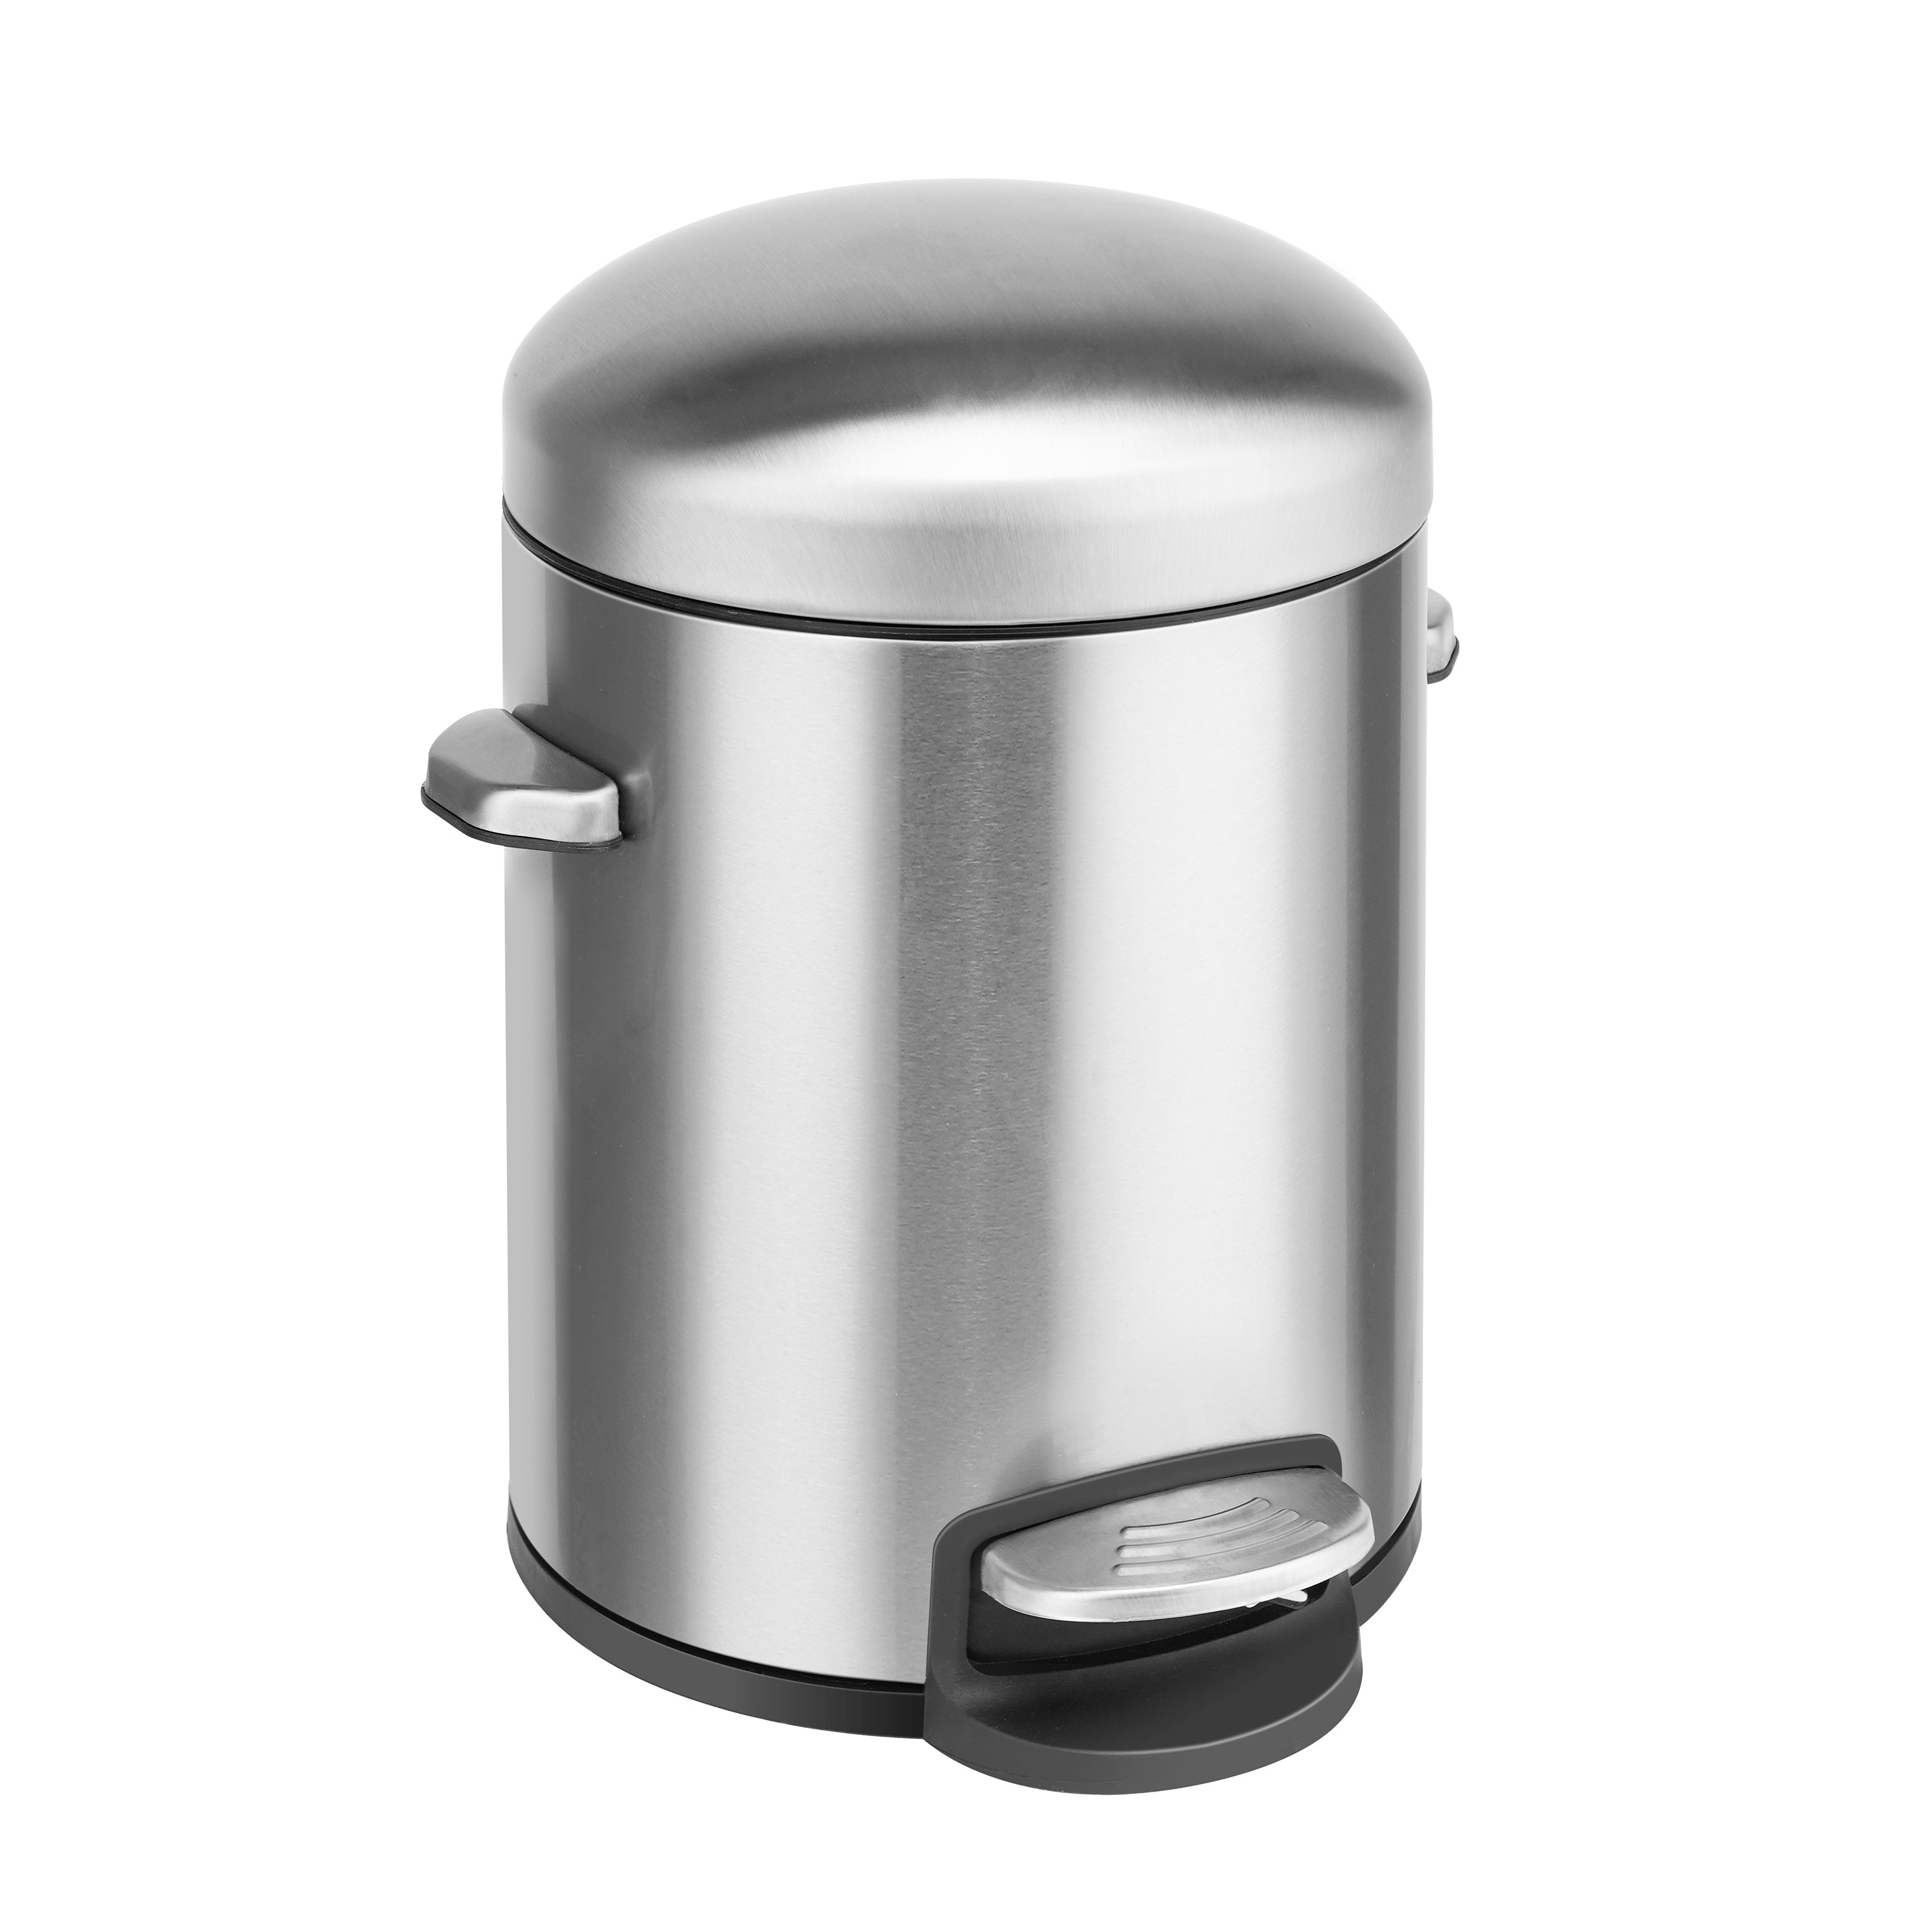 1.32 Gallon Stainless Steel Round Step-on Bathroom and Office Trash Can